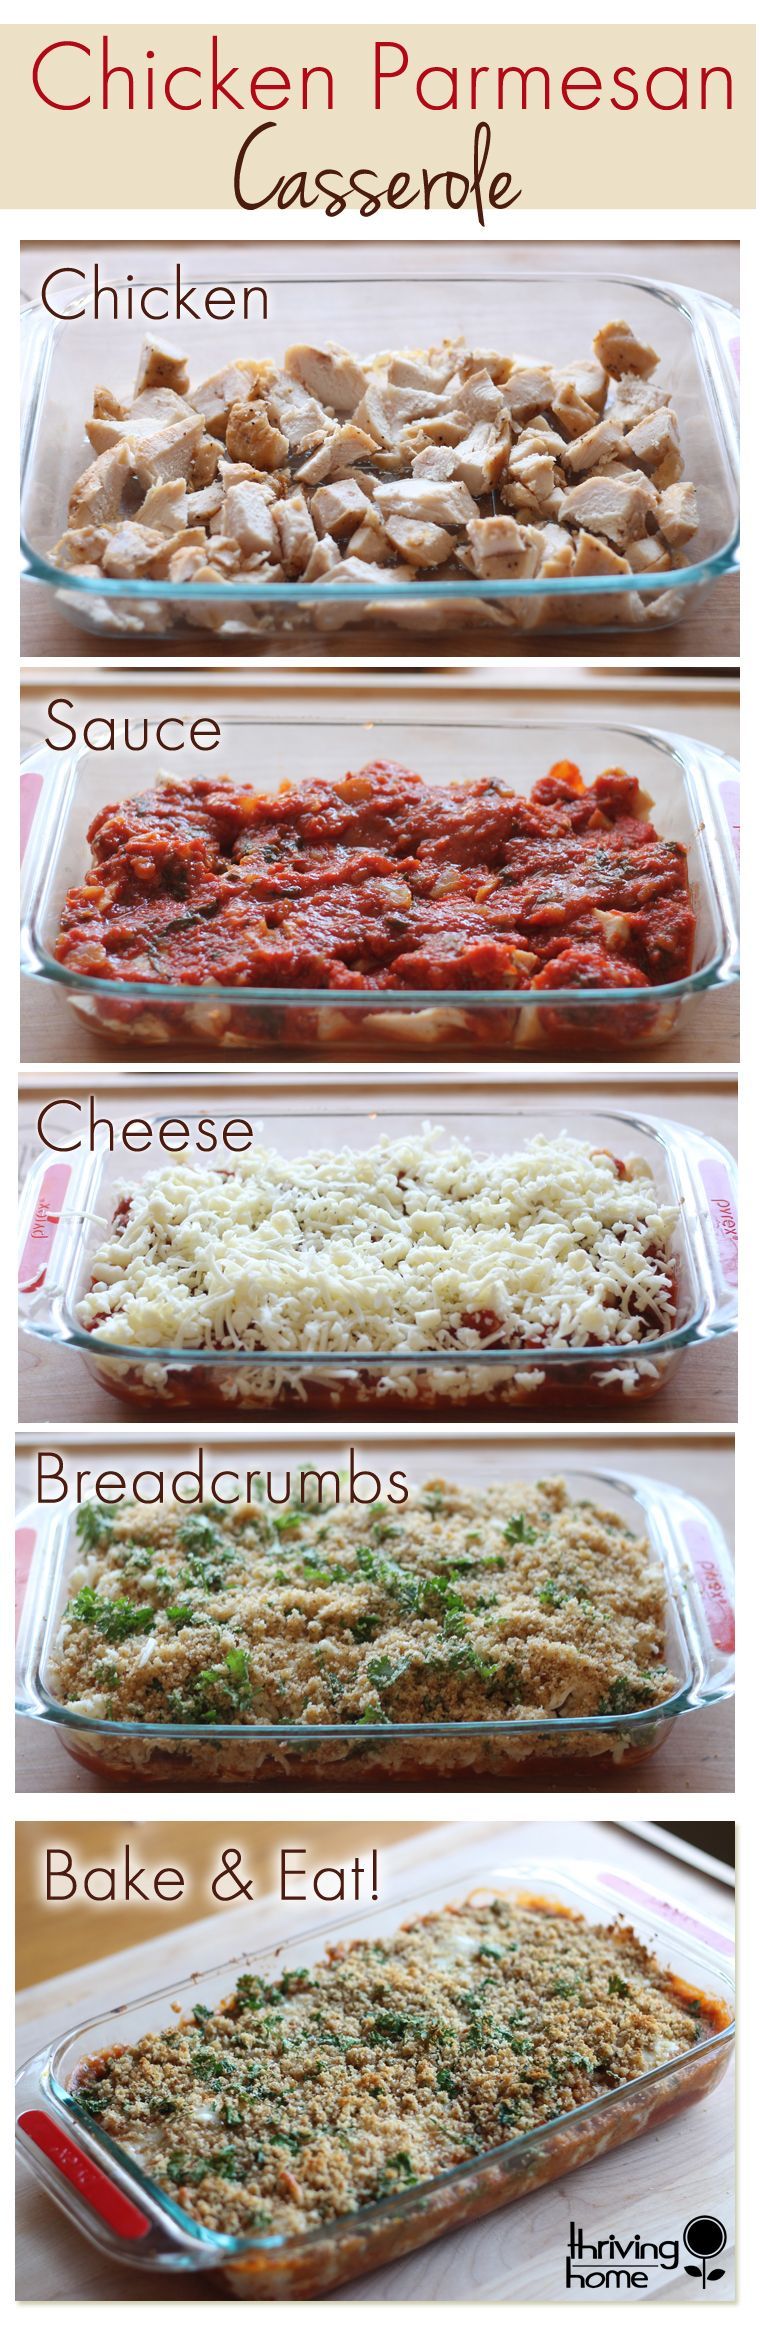 Chicken parmesan casserole. A family favorite that is super easy to make. This rea